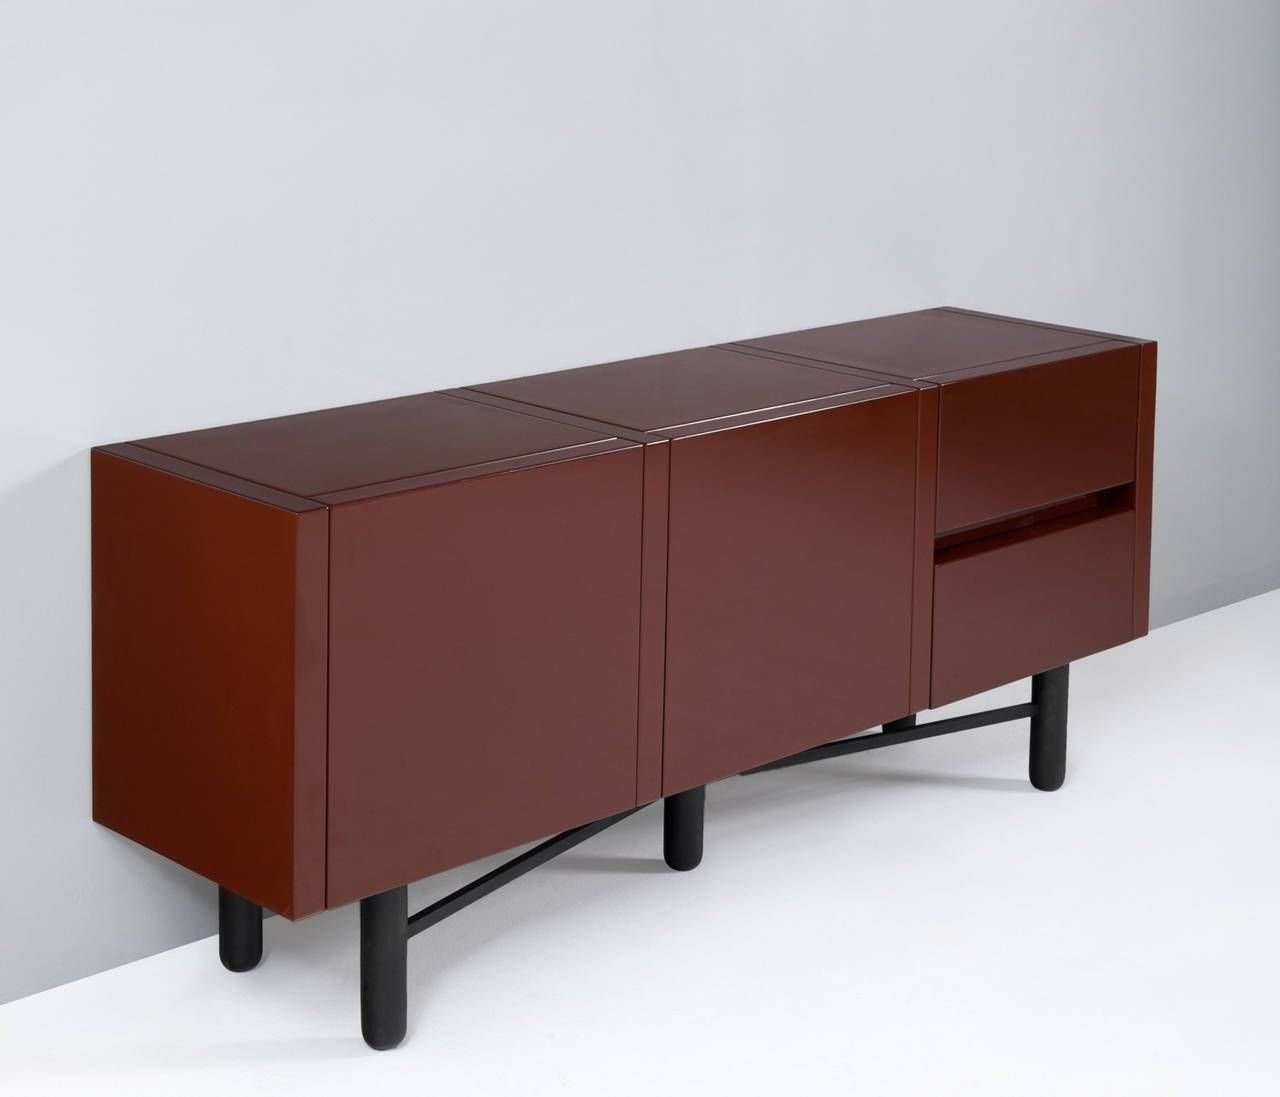 Roche Bobois Red Lacquered High Gloss Sideboard For Sale At 1stdibs Within Black Gloss Sideboards (View 9 of 15)